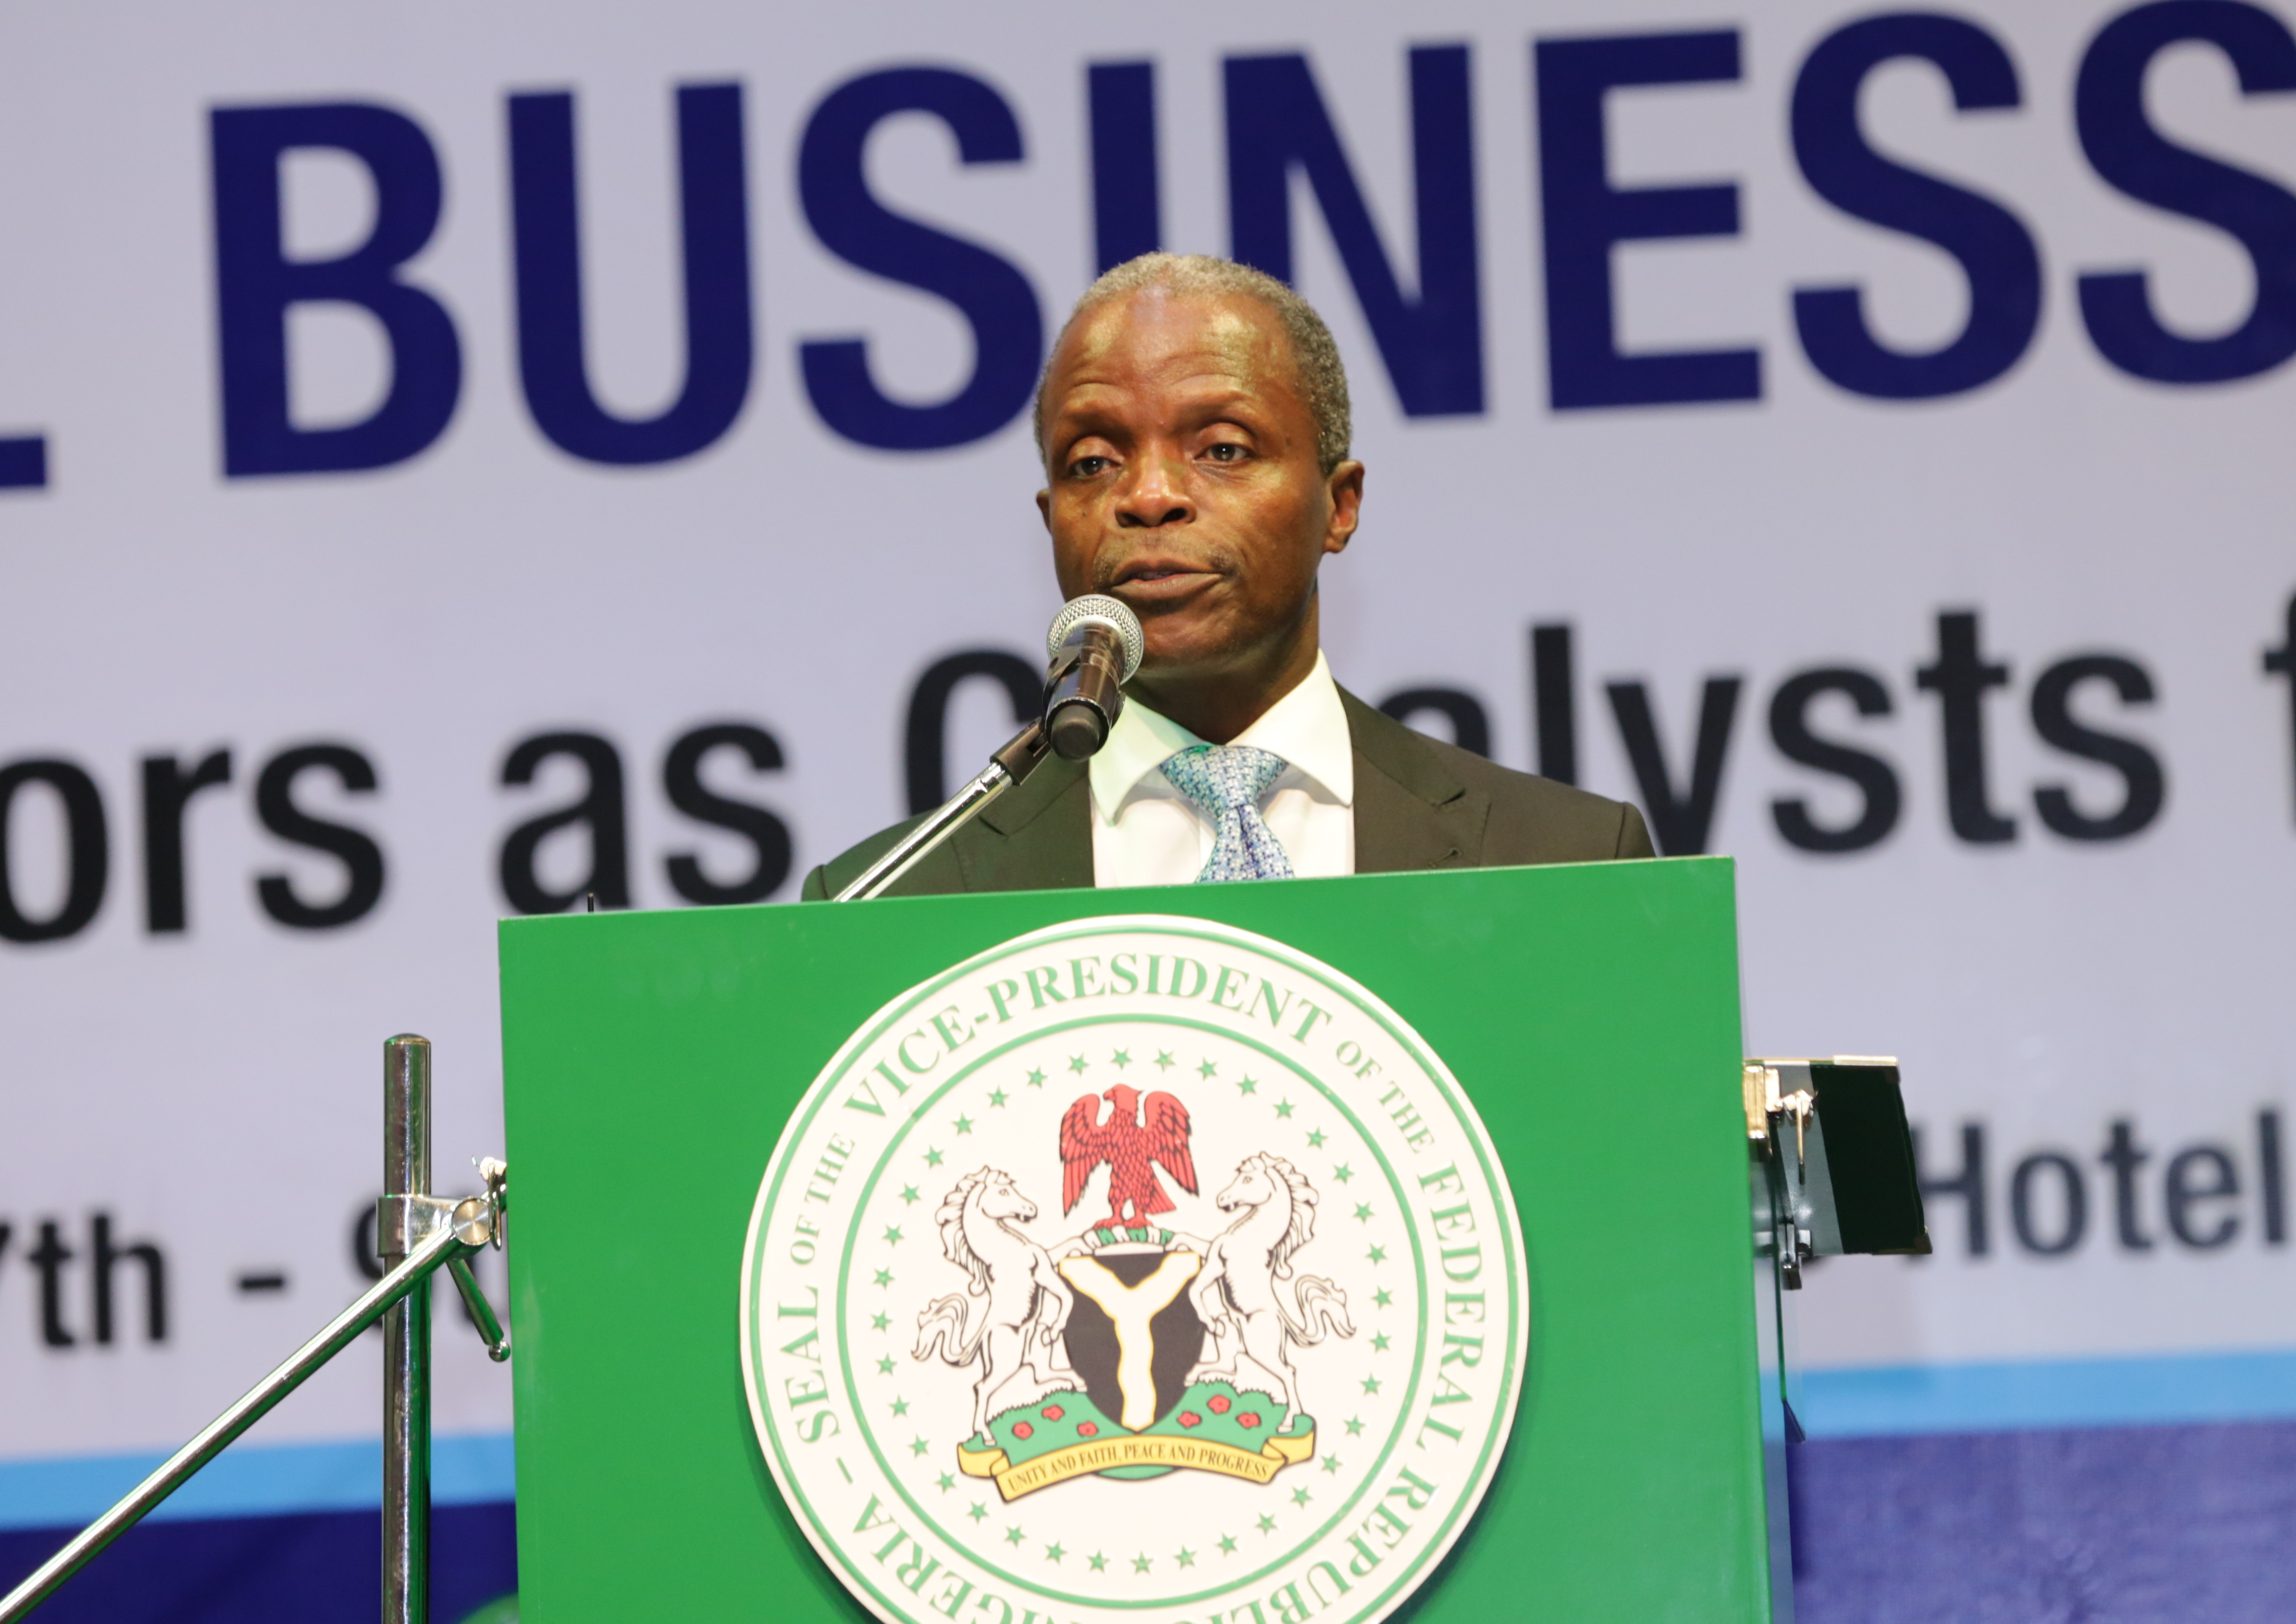 VP Osinbajo At The 9th Annual Law Conference On 07/06/2015